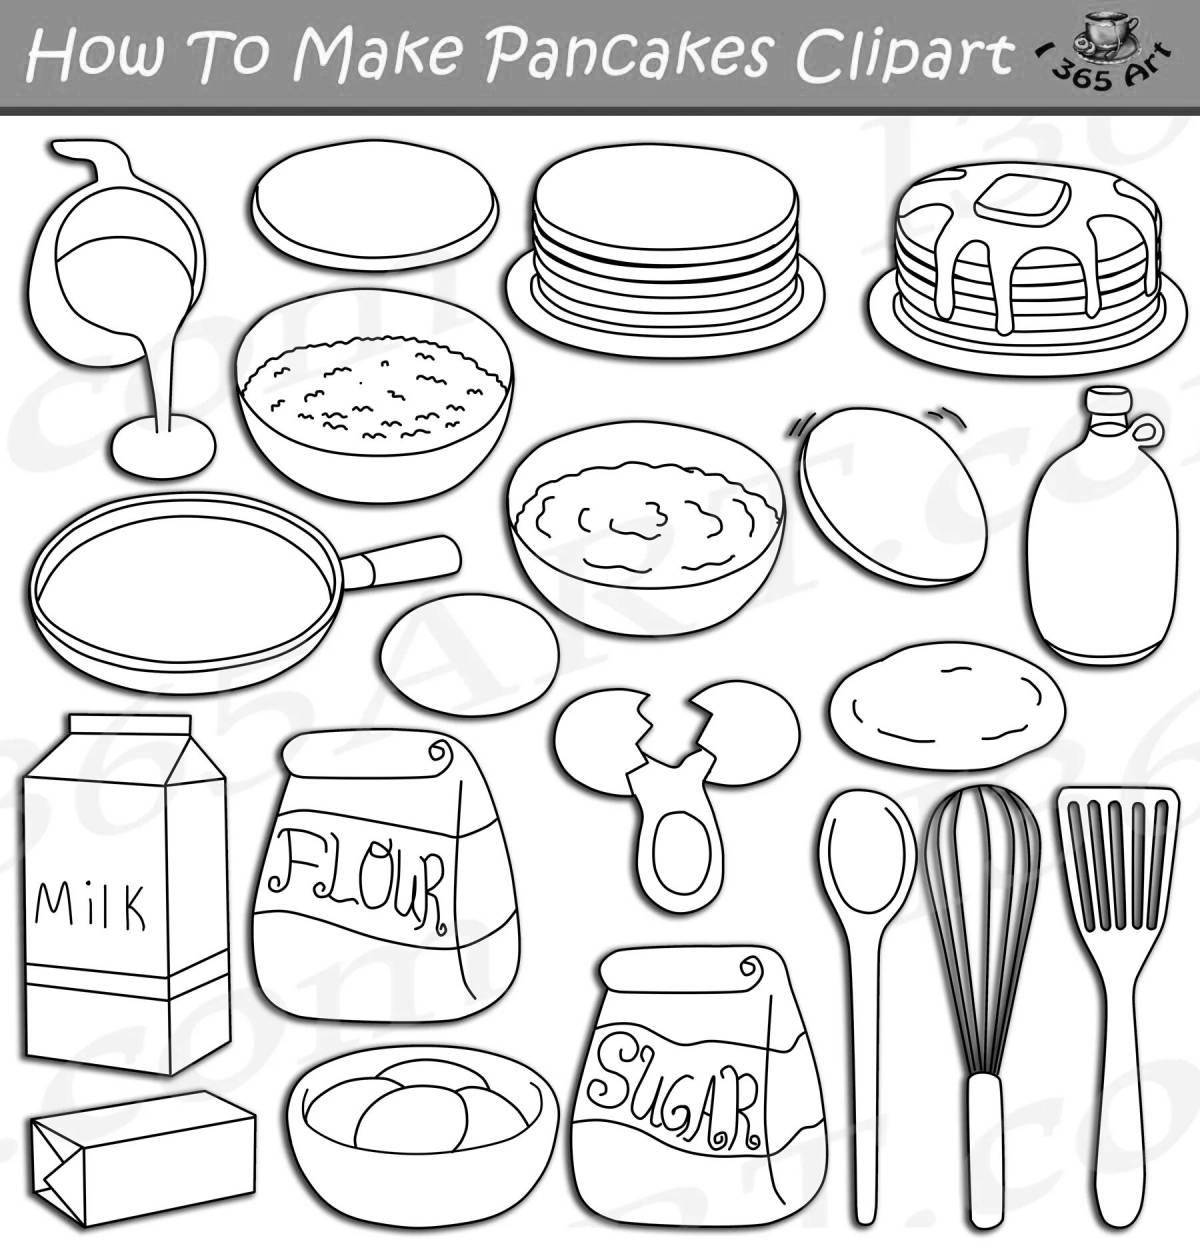 Fancy pancakes coloring pages for kids